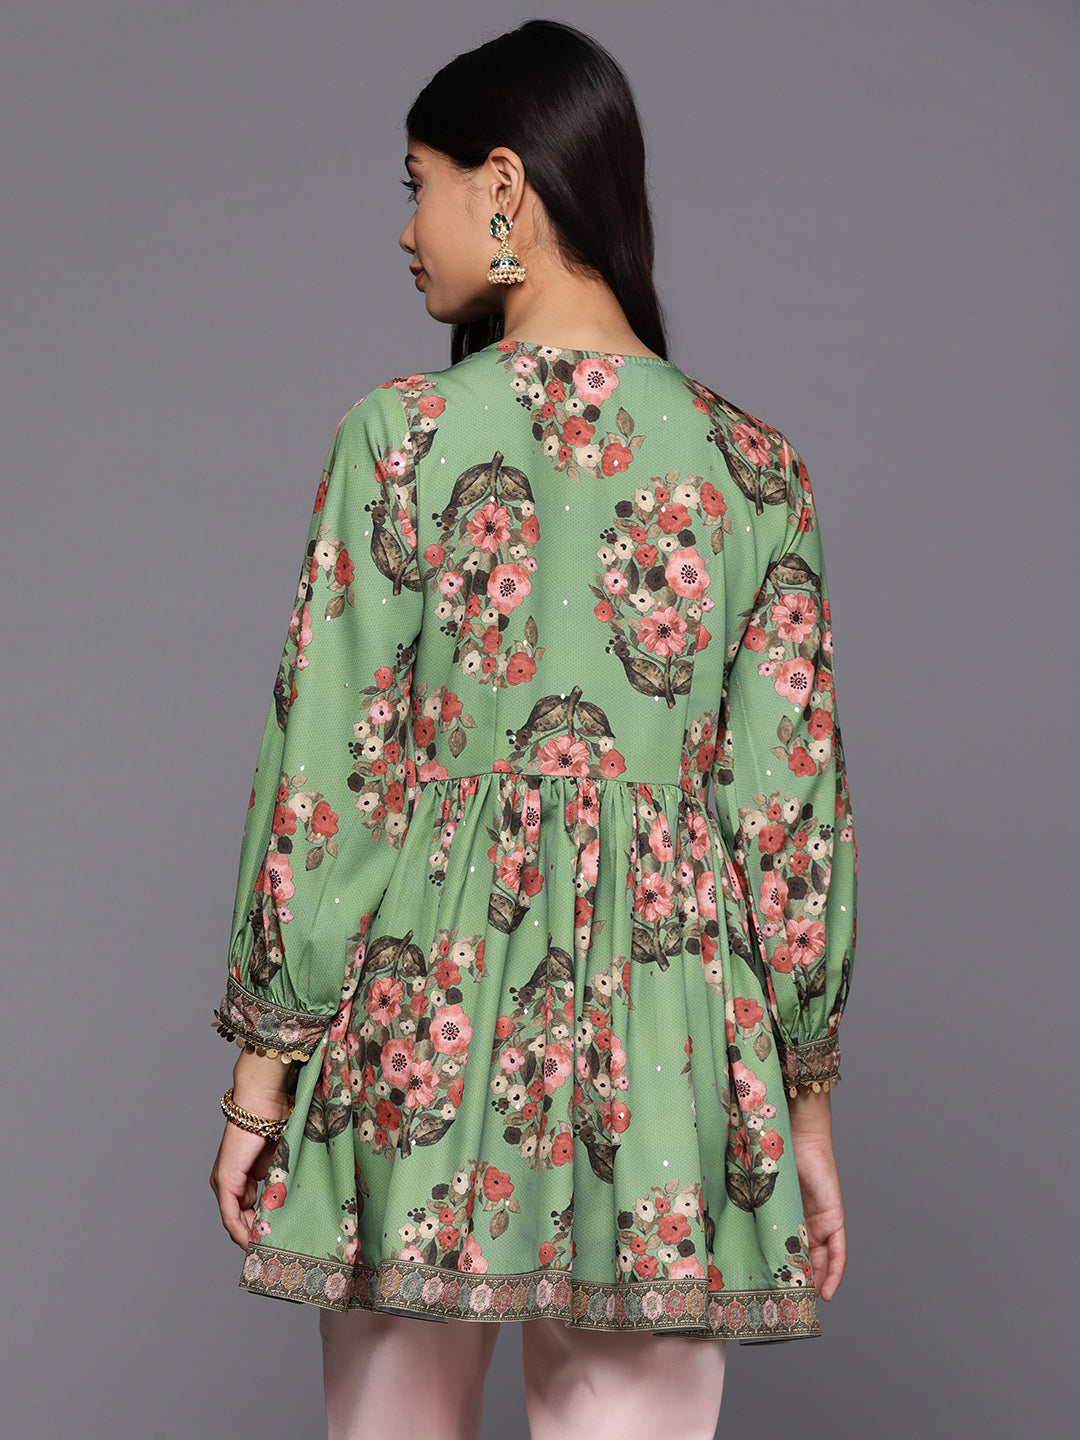 Green & Pink Floral Printed Tunic